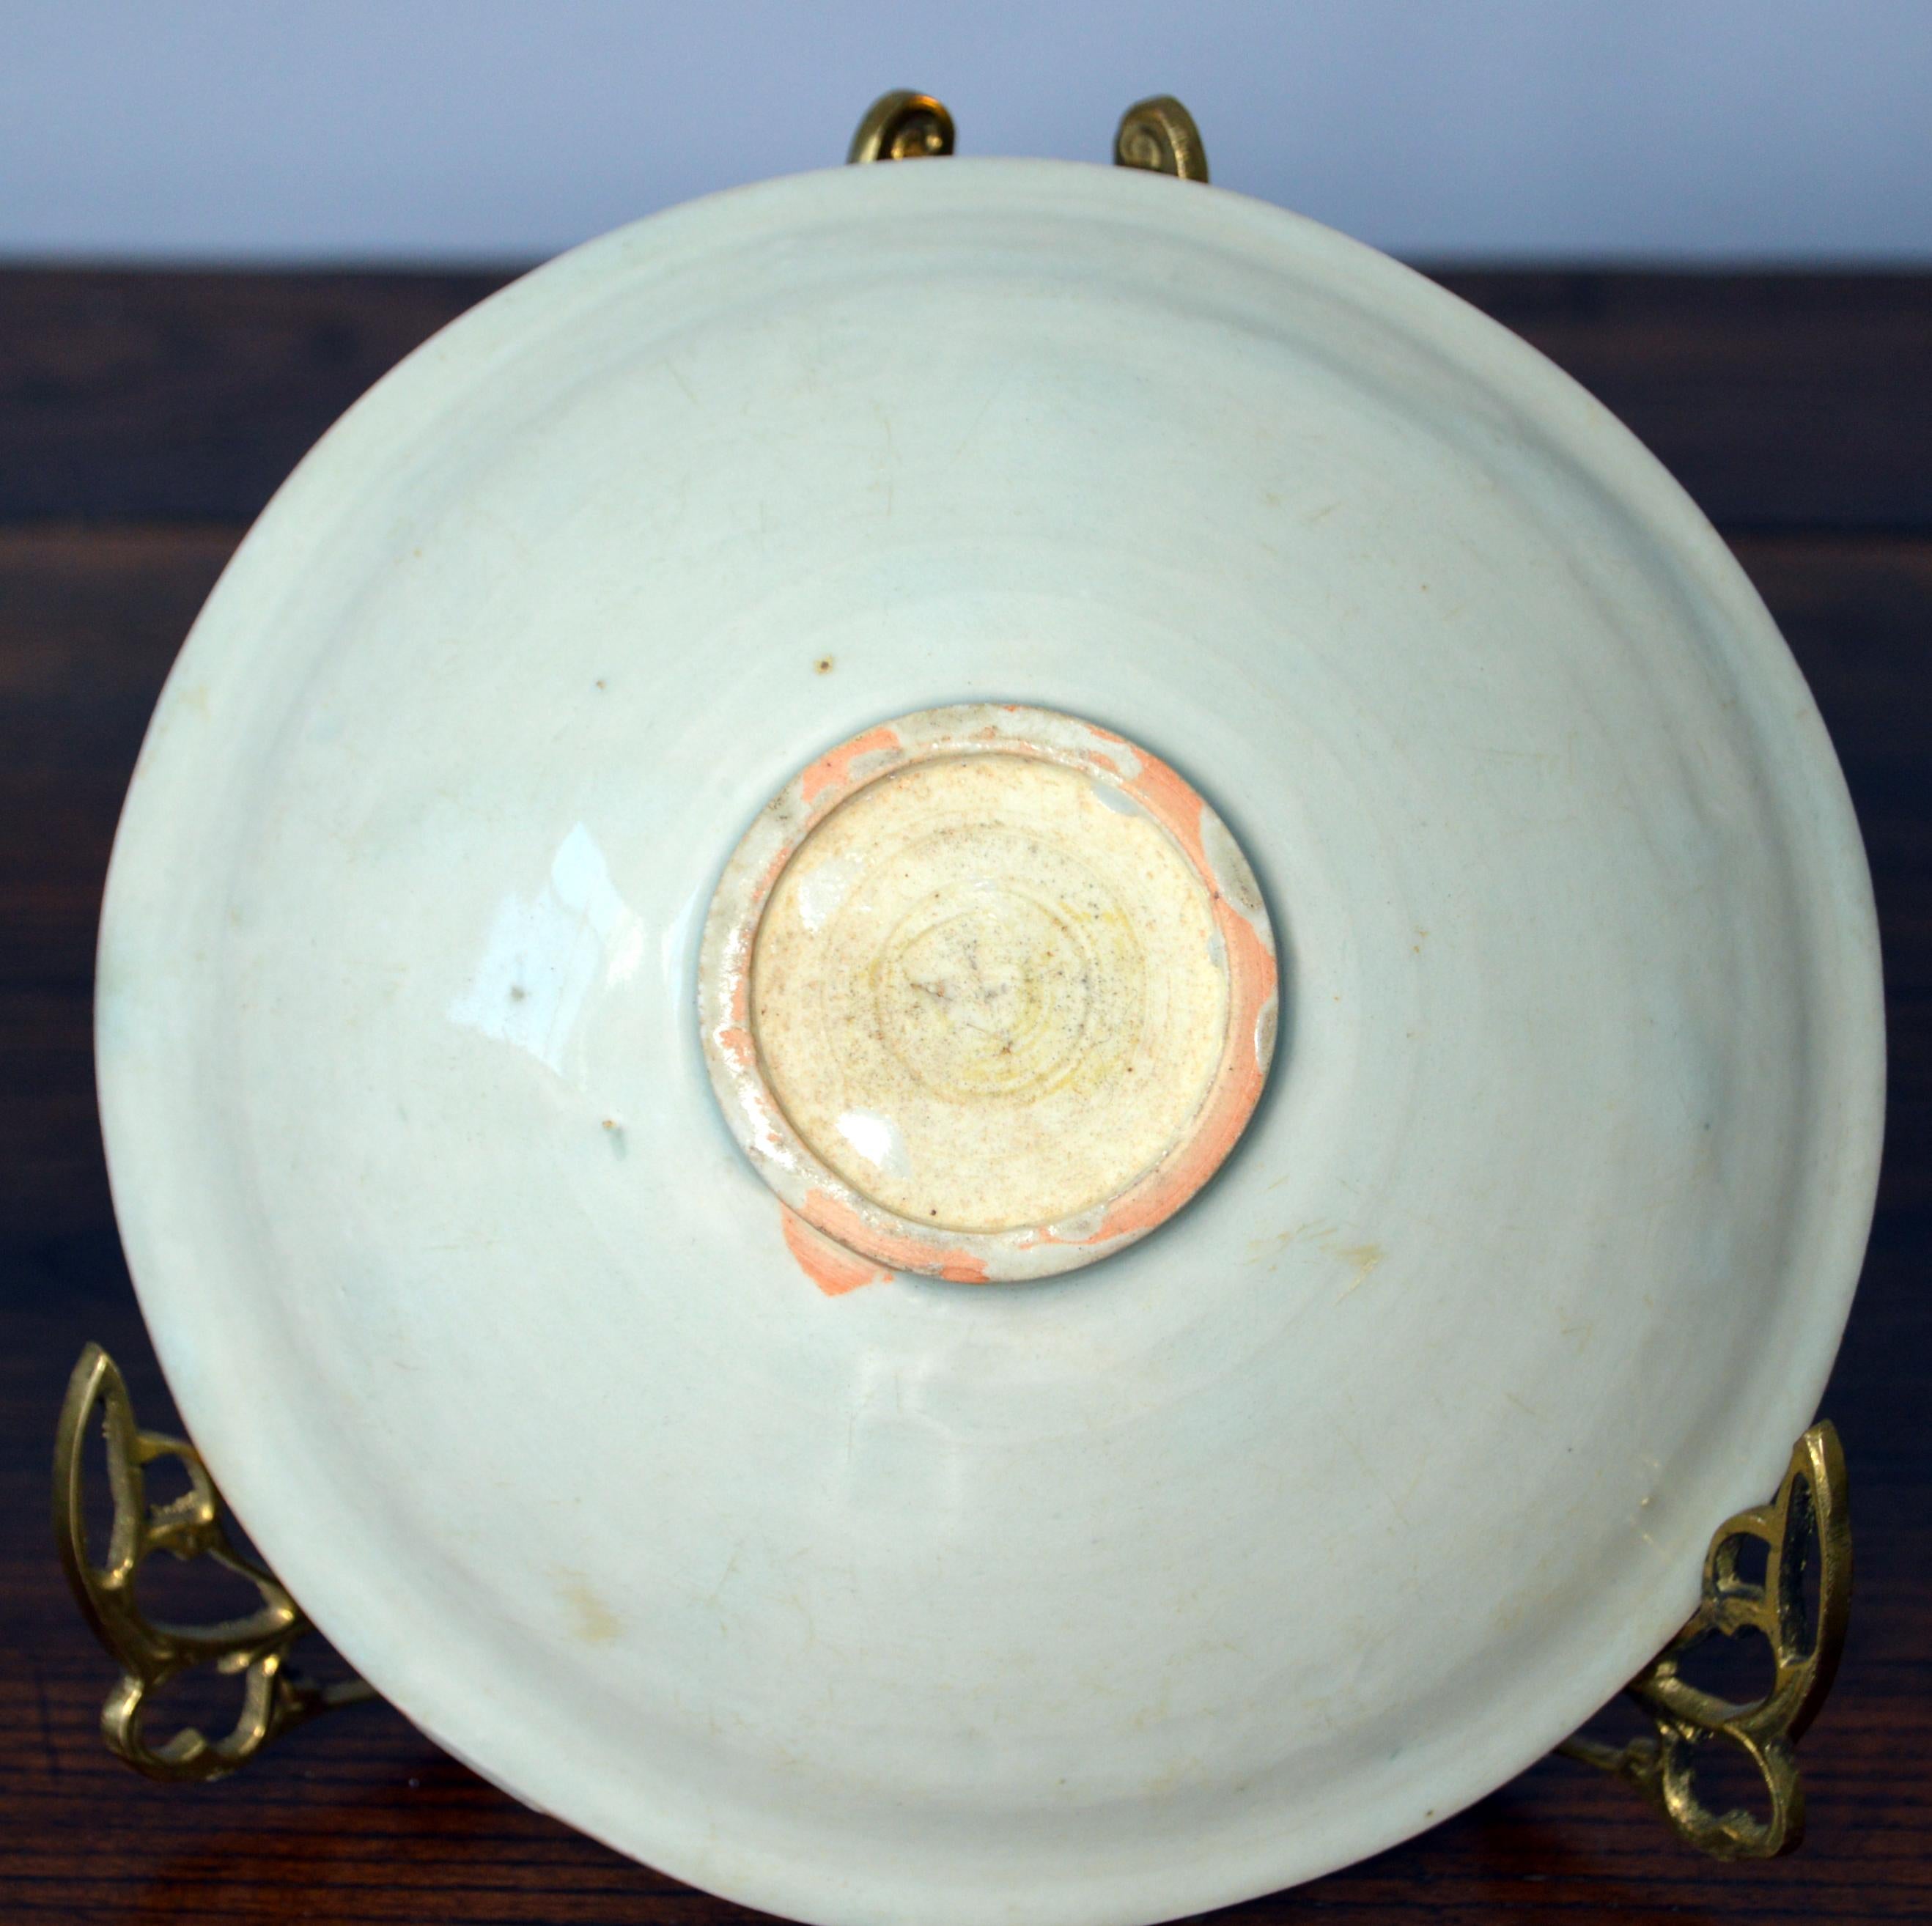 Glazed 10th-13th Century Song Dynasty Chinese Celadon Porcelain Bowl with Floral Motifs